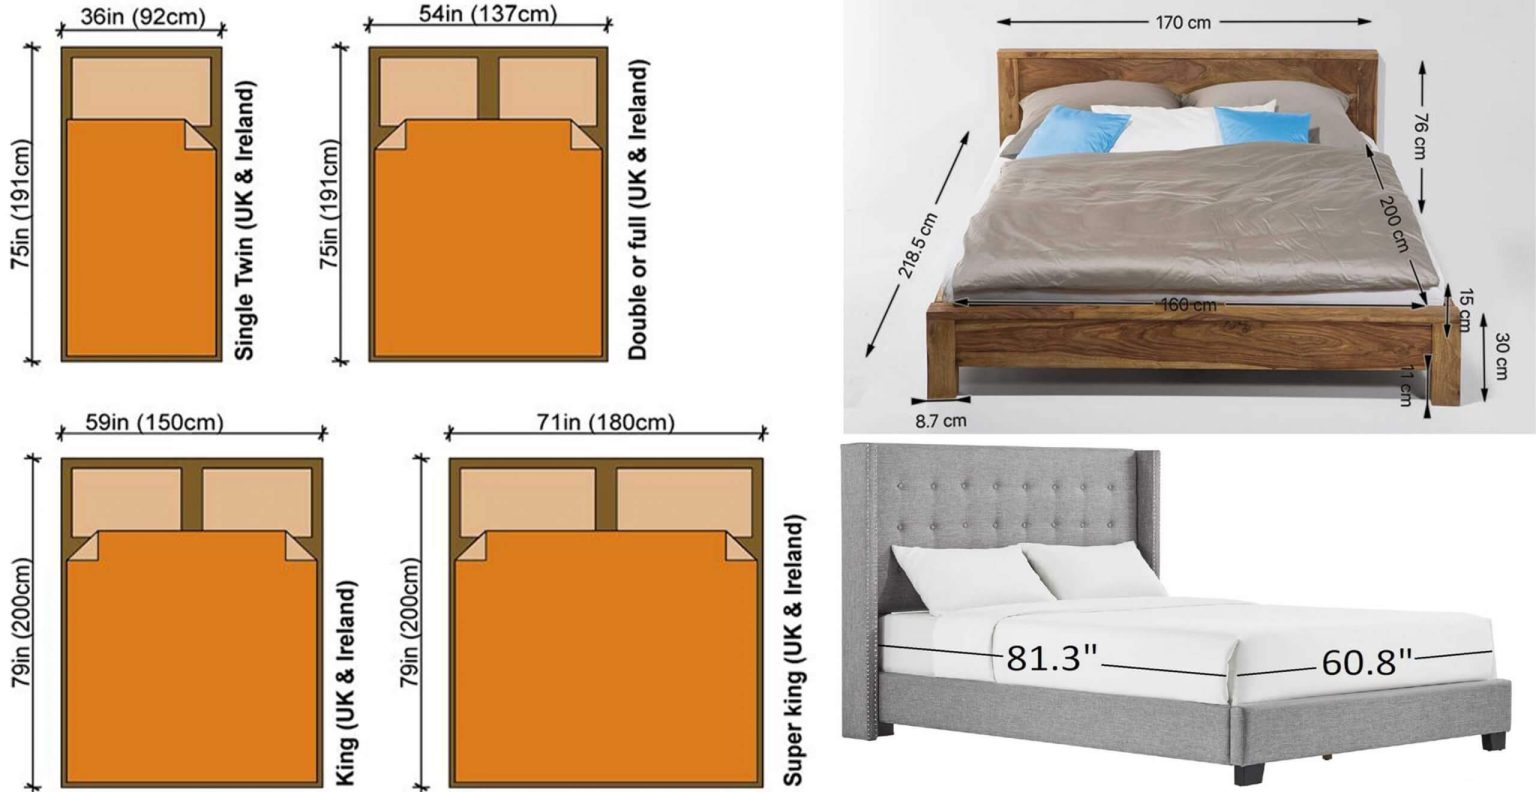 fitted bedroom furniture dimensions